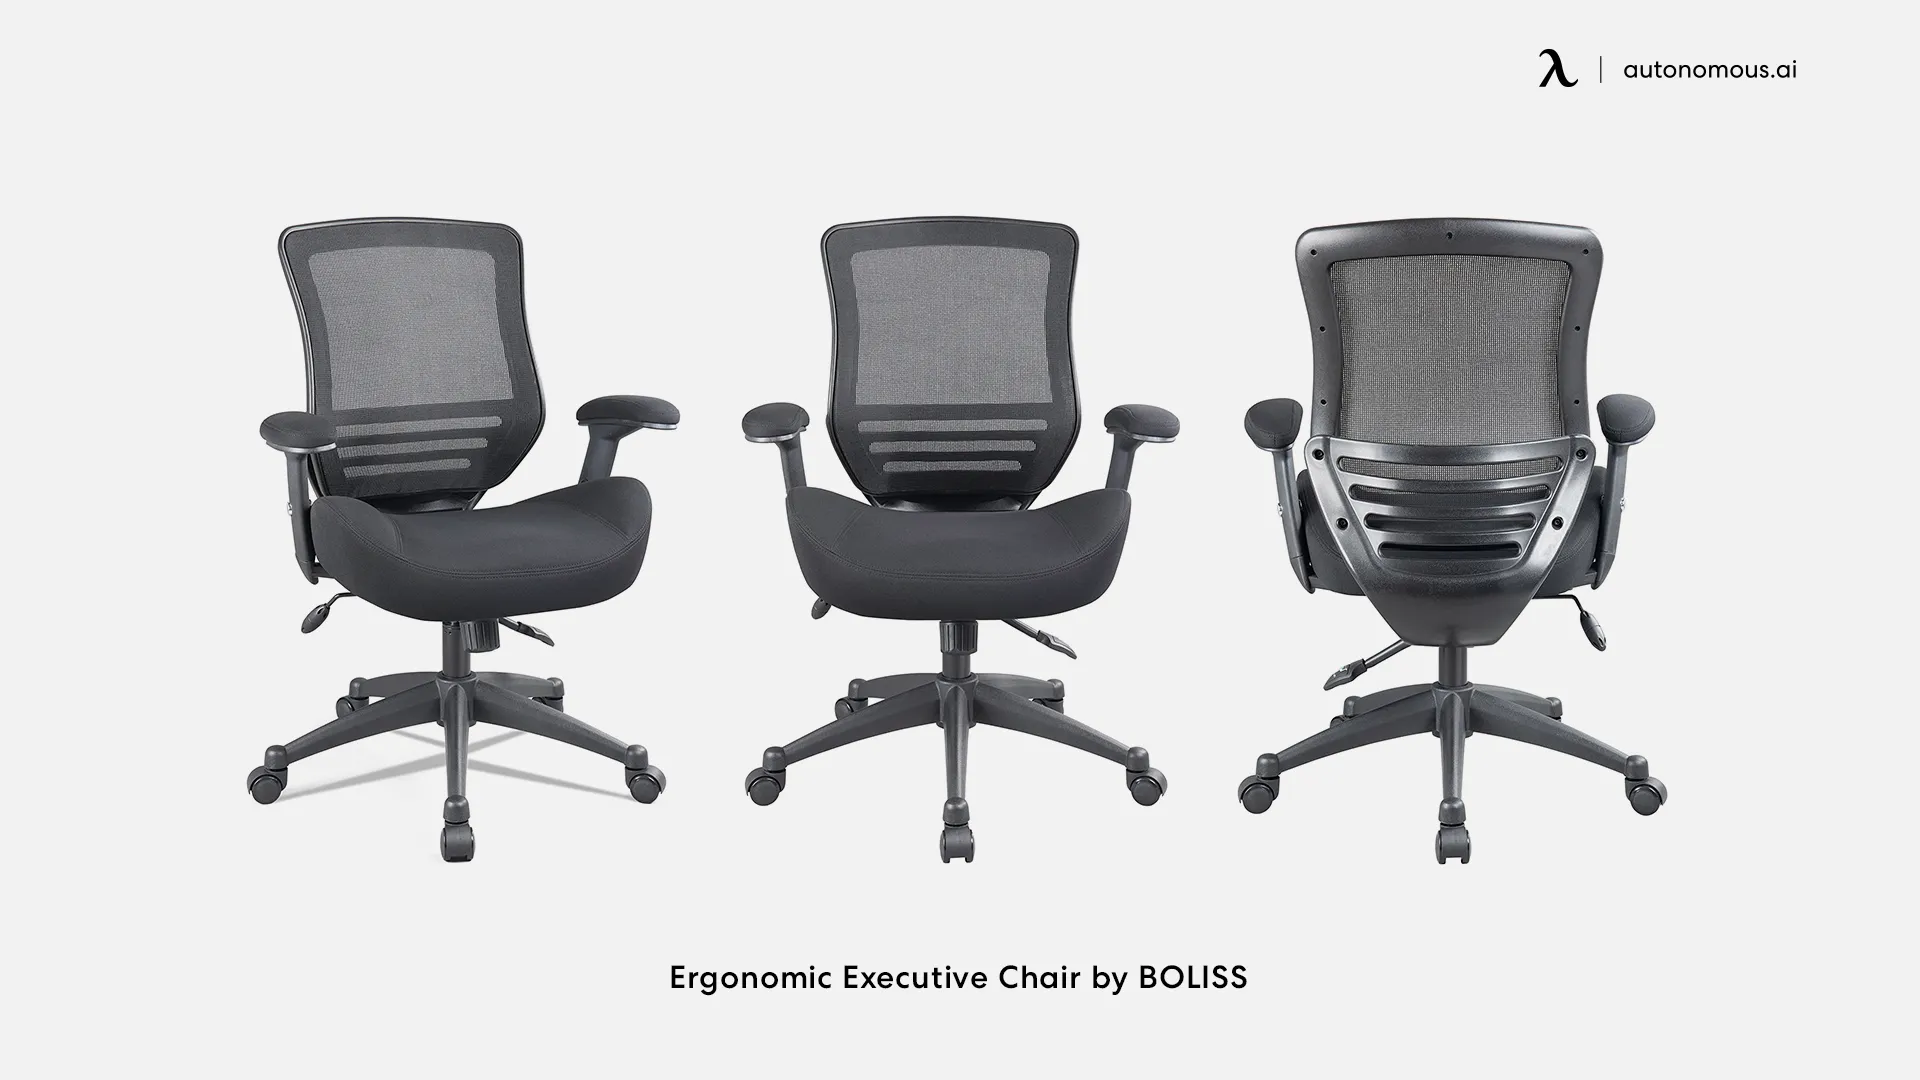 Ergonomic Executive Chair by BOLISS